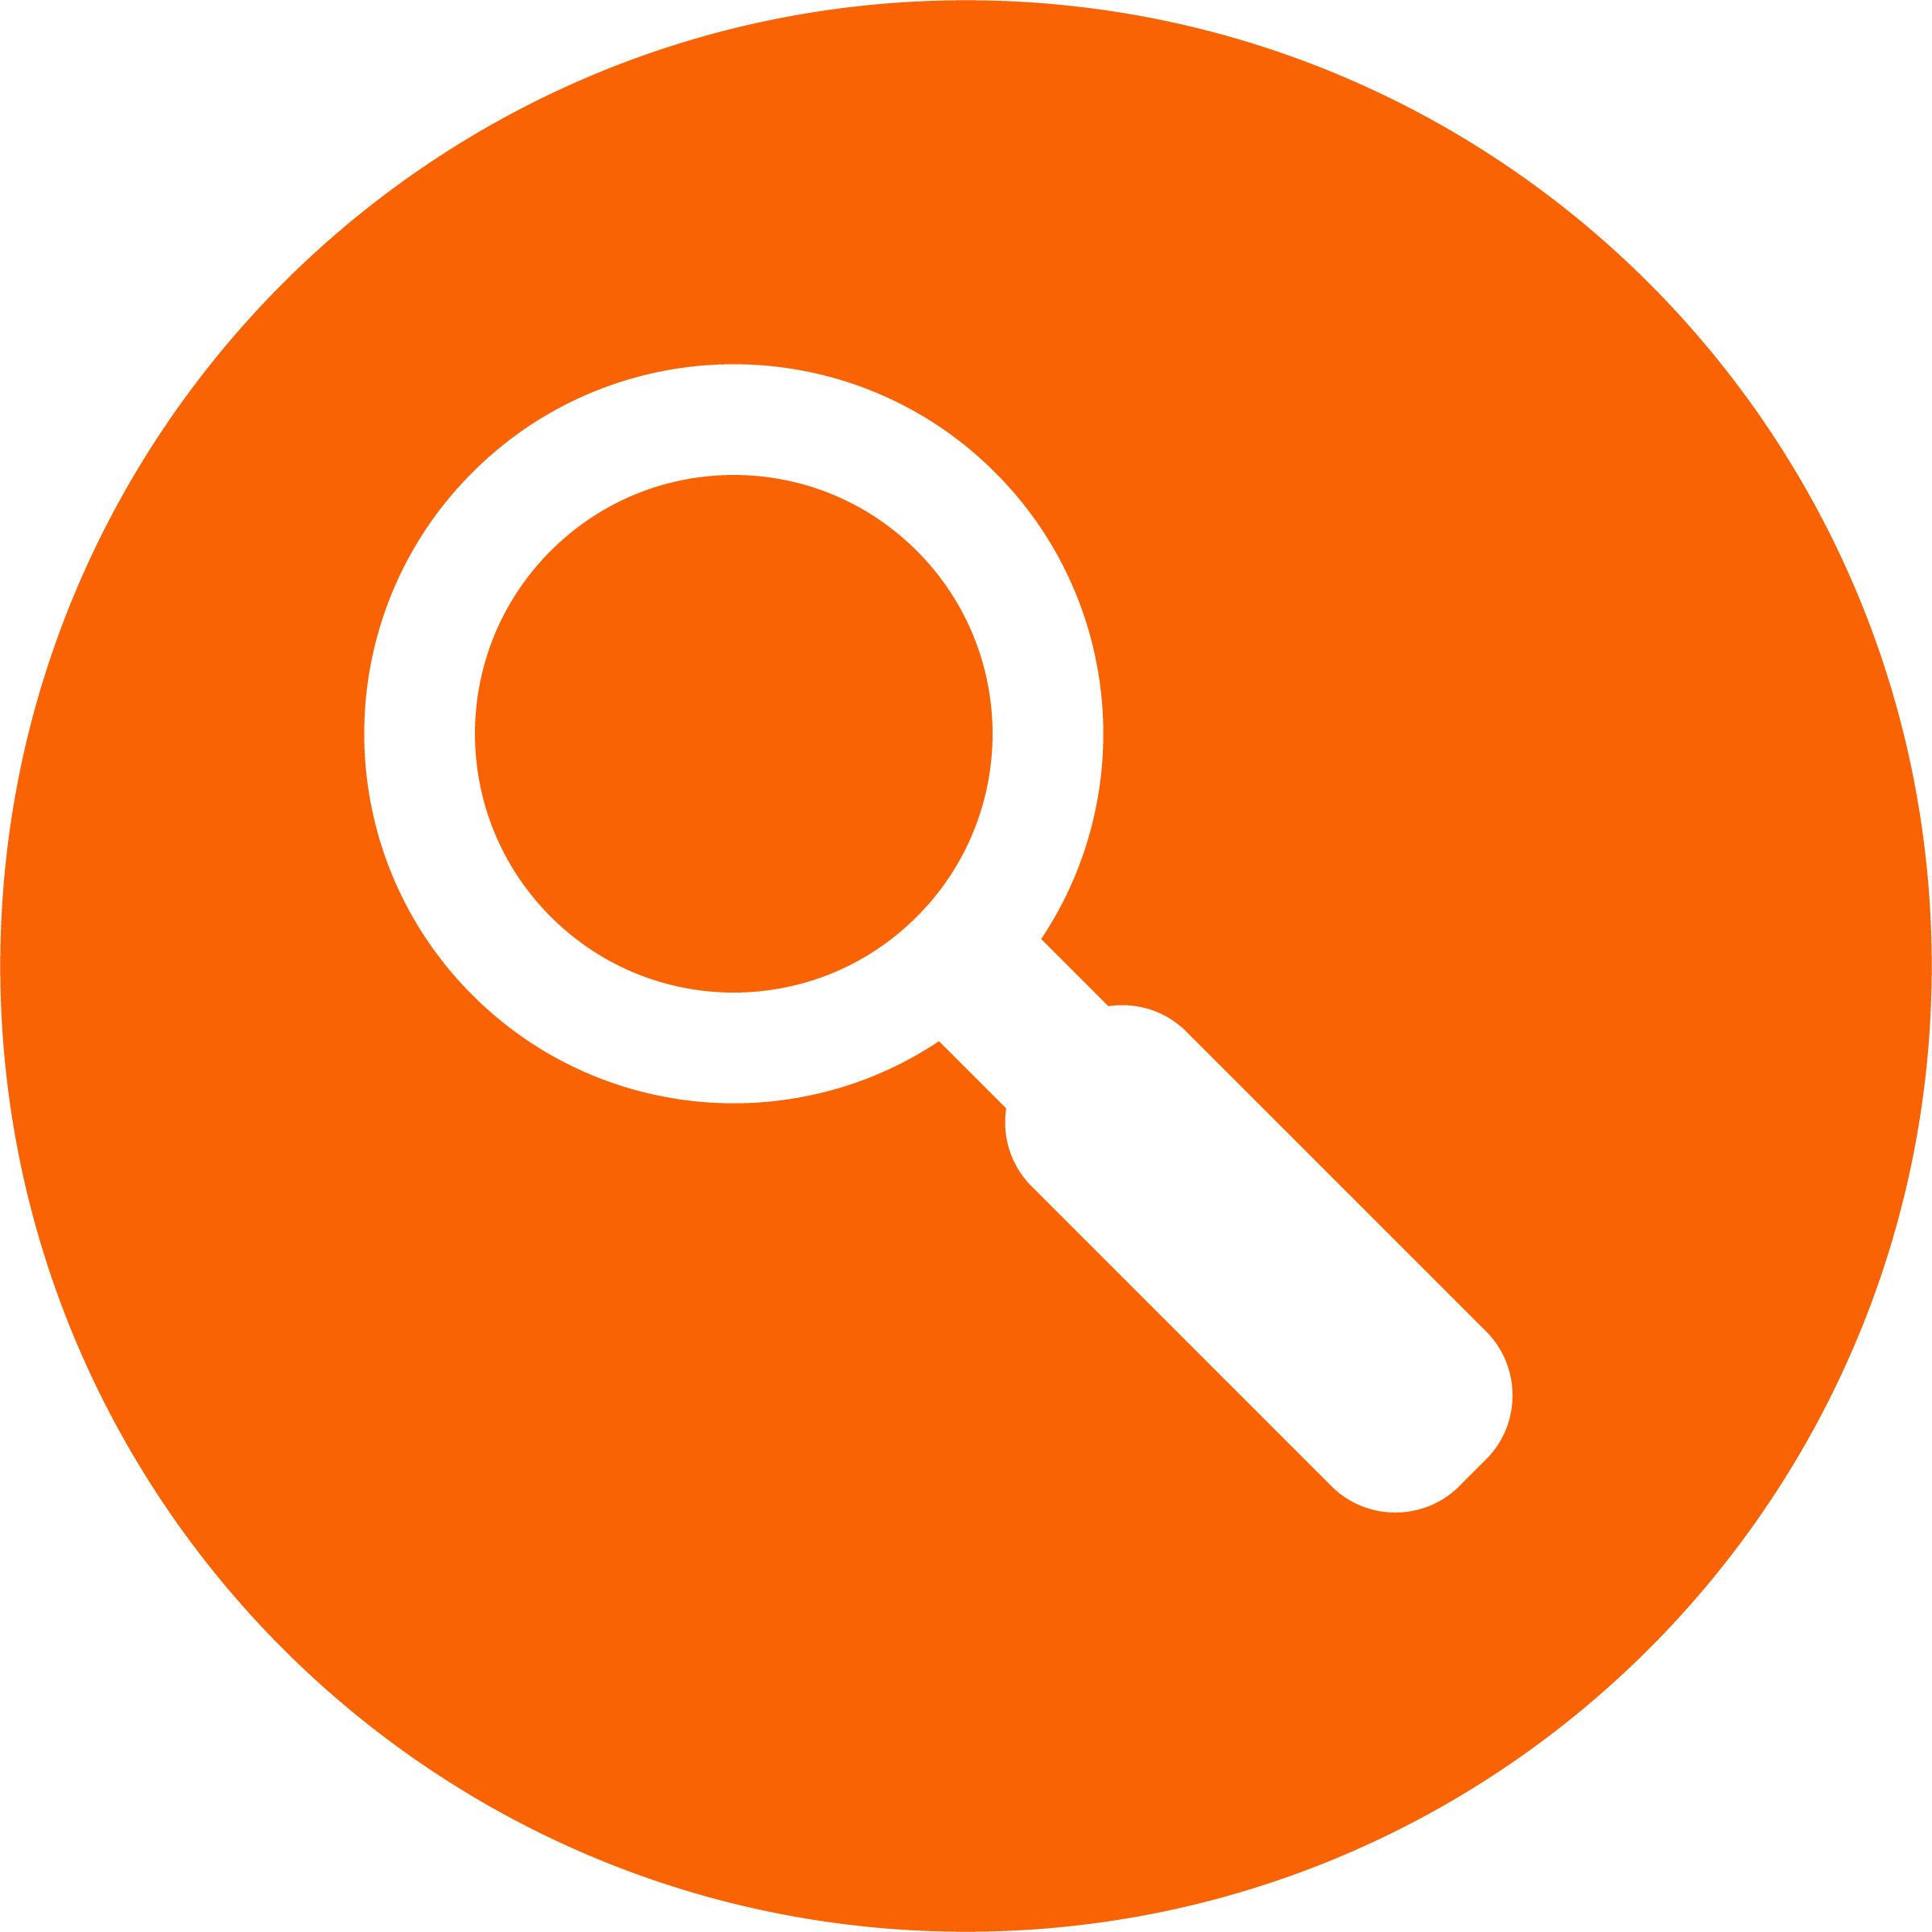 evaluation magnifying glass icon